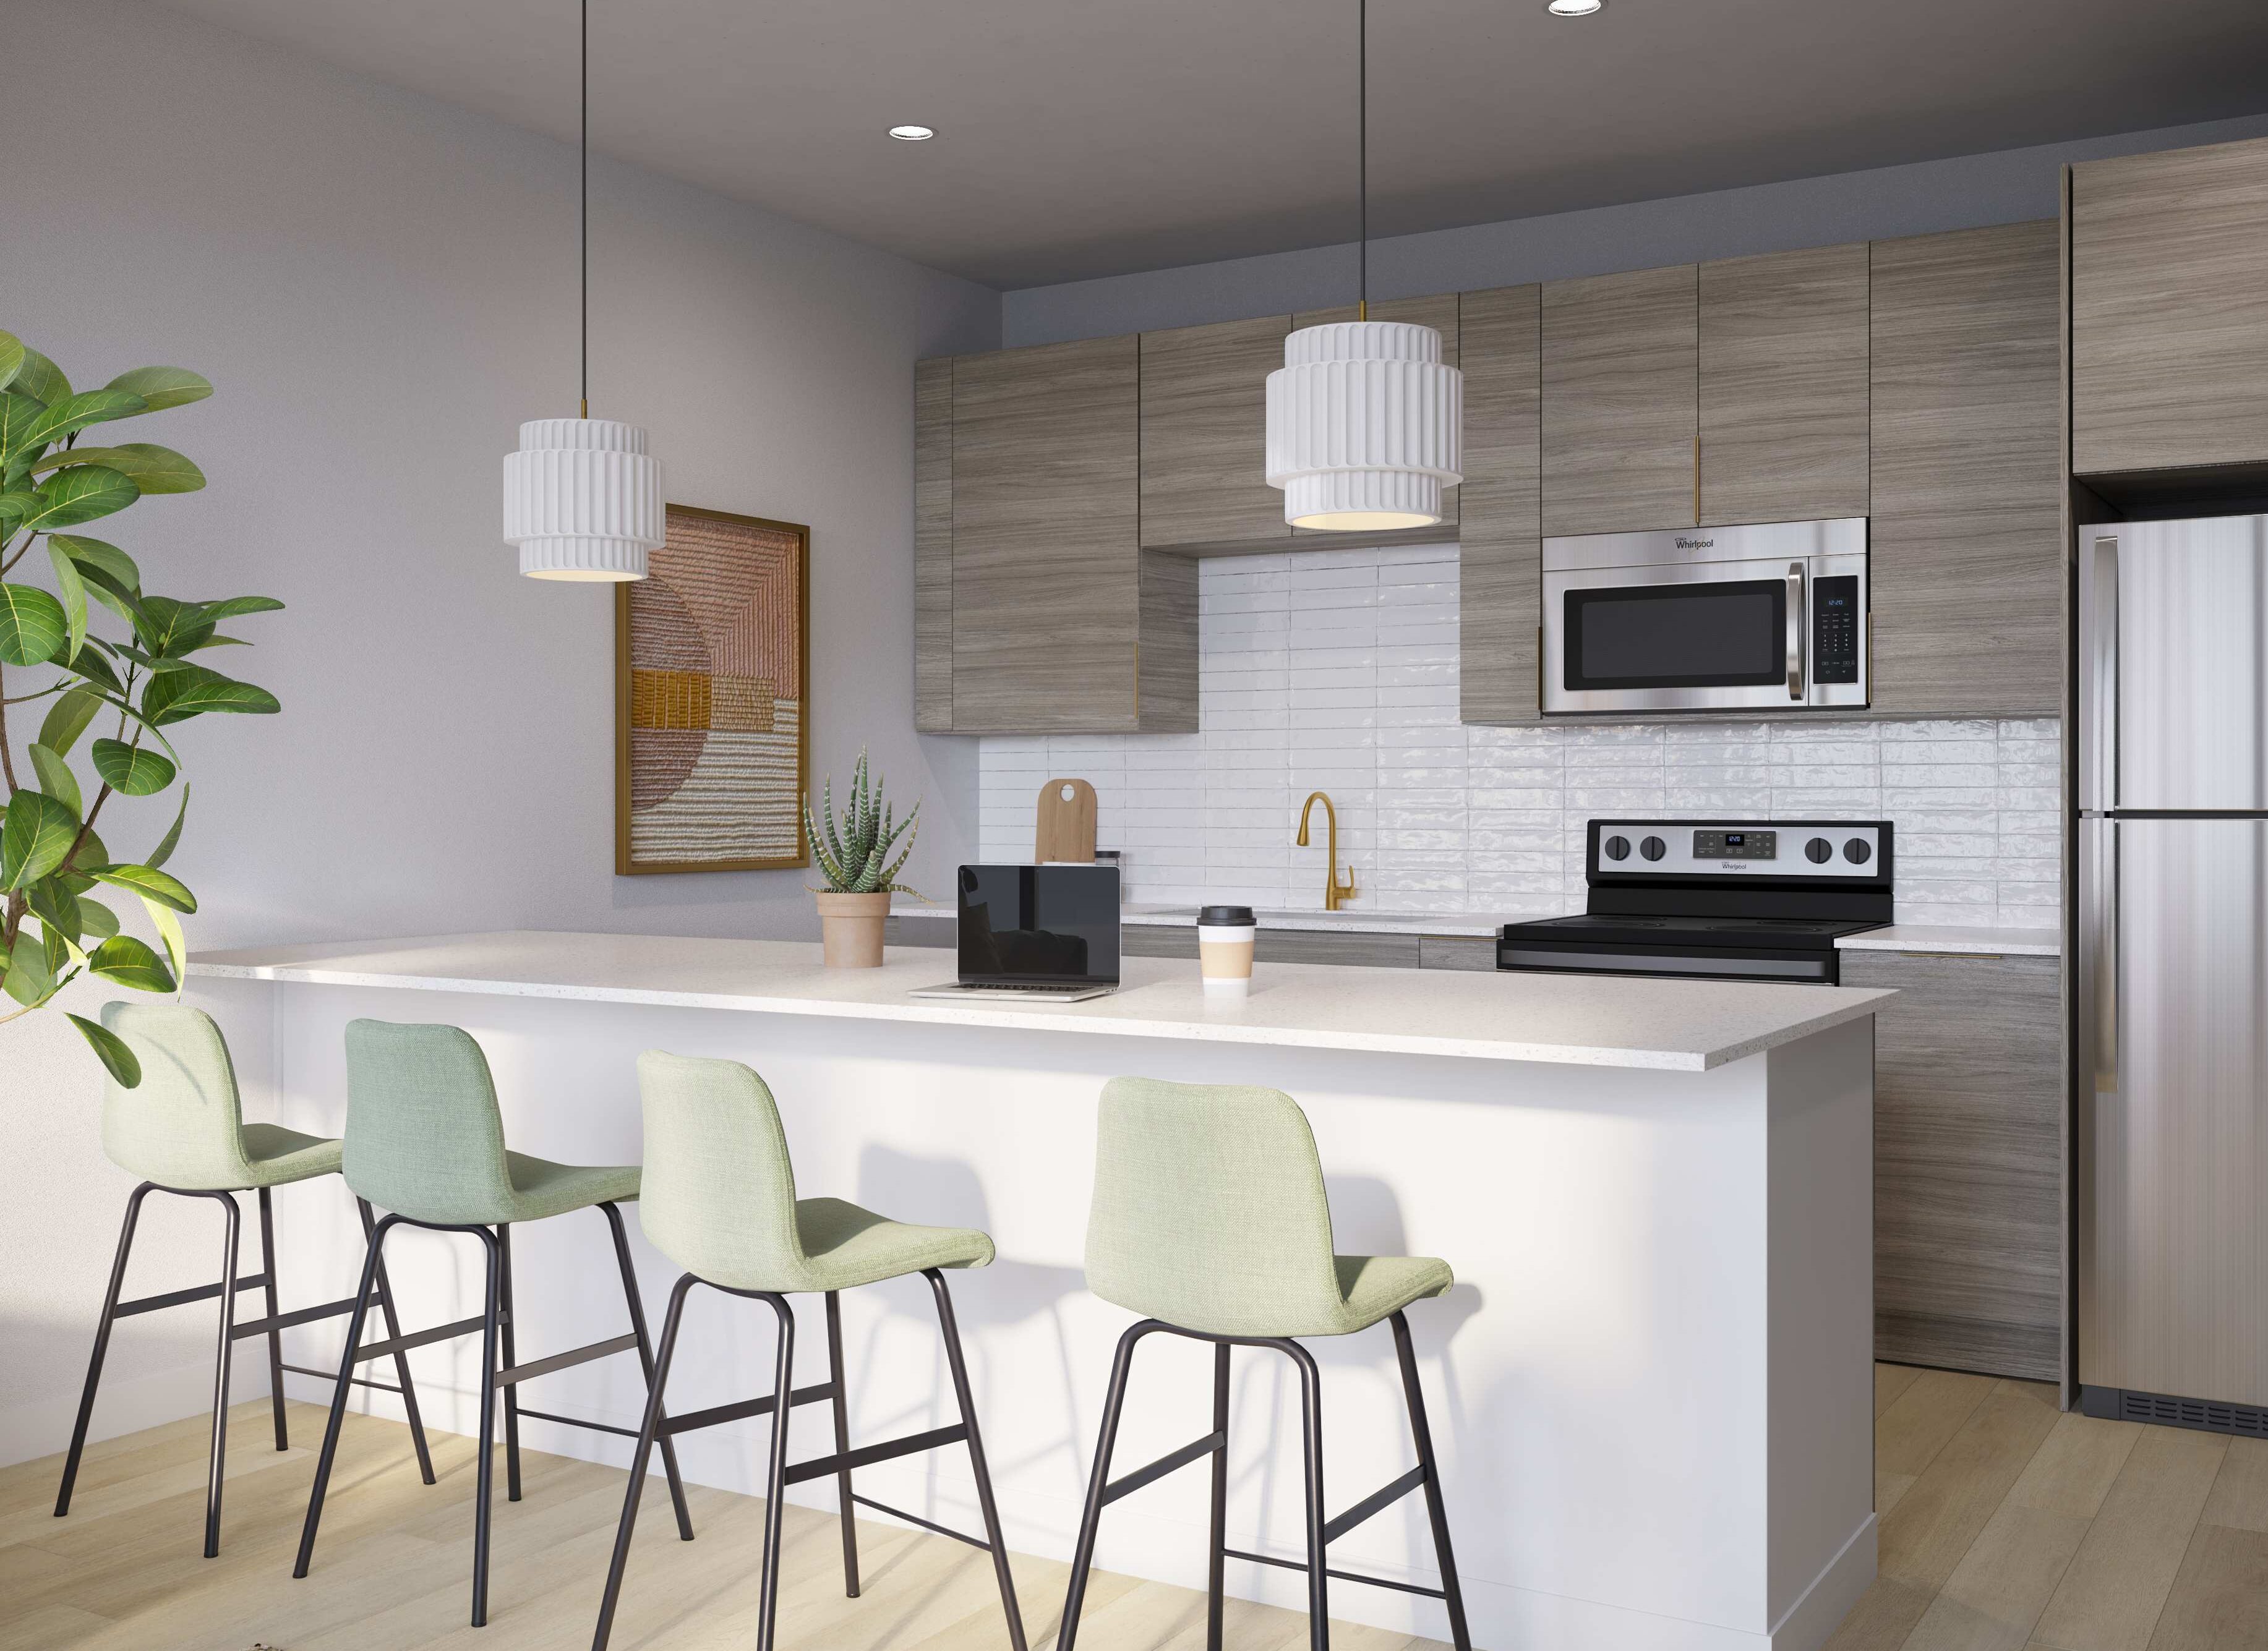 Representative rendering of the kitchen of the hoxton 5x5 at sweetwater gainesville